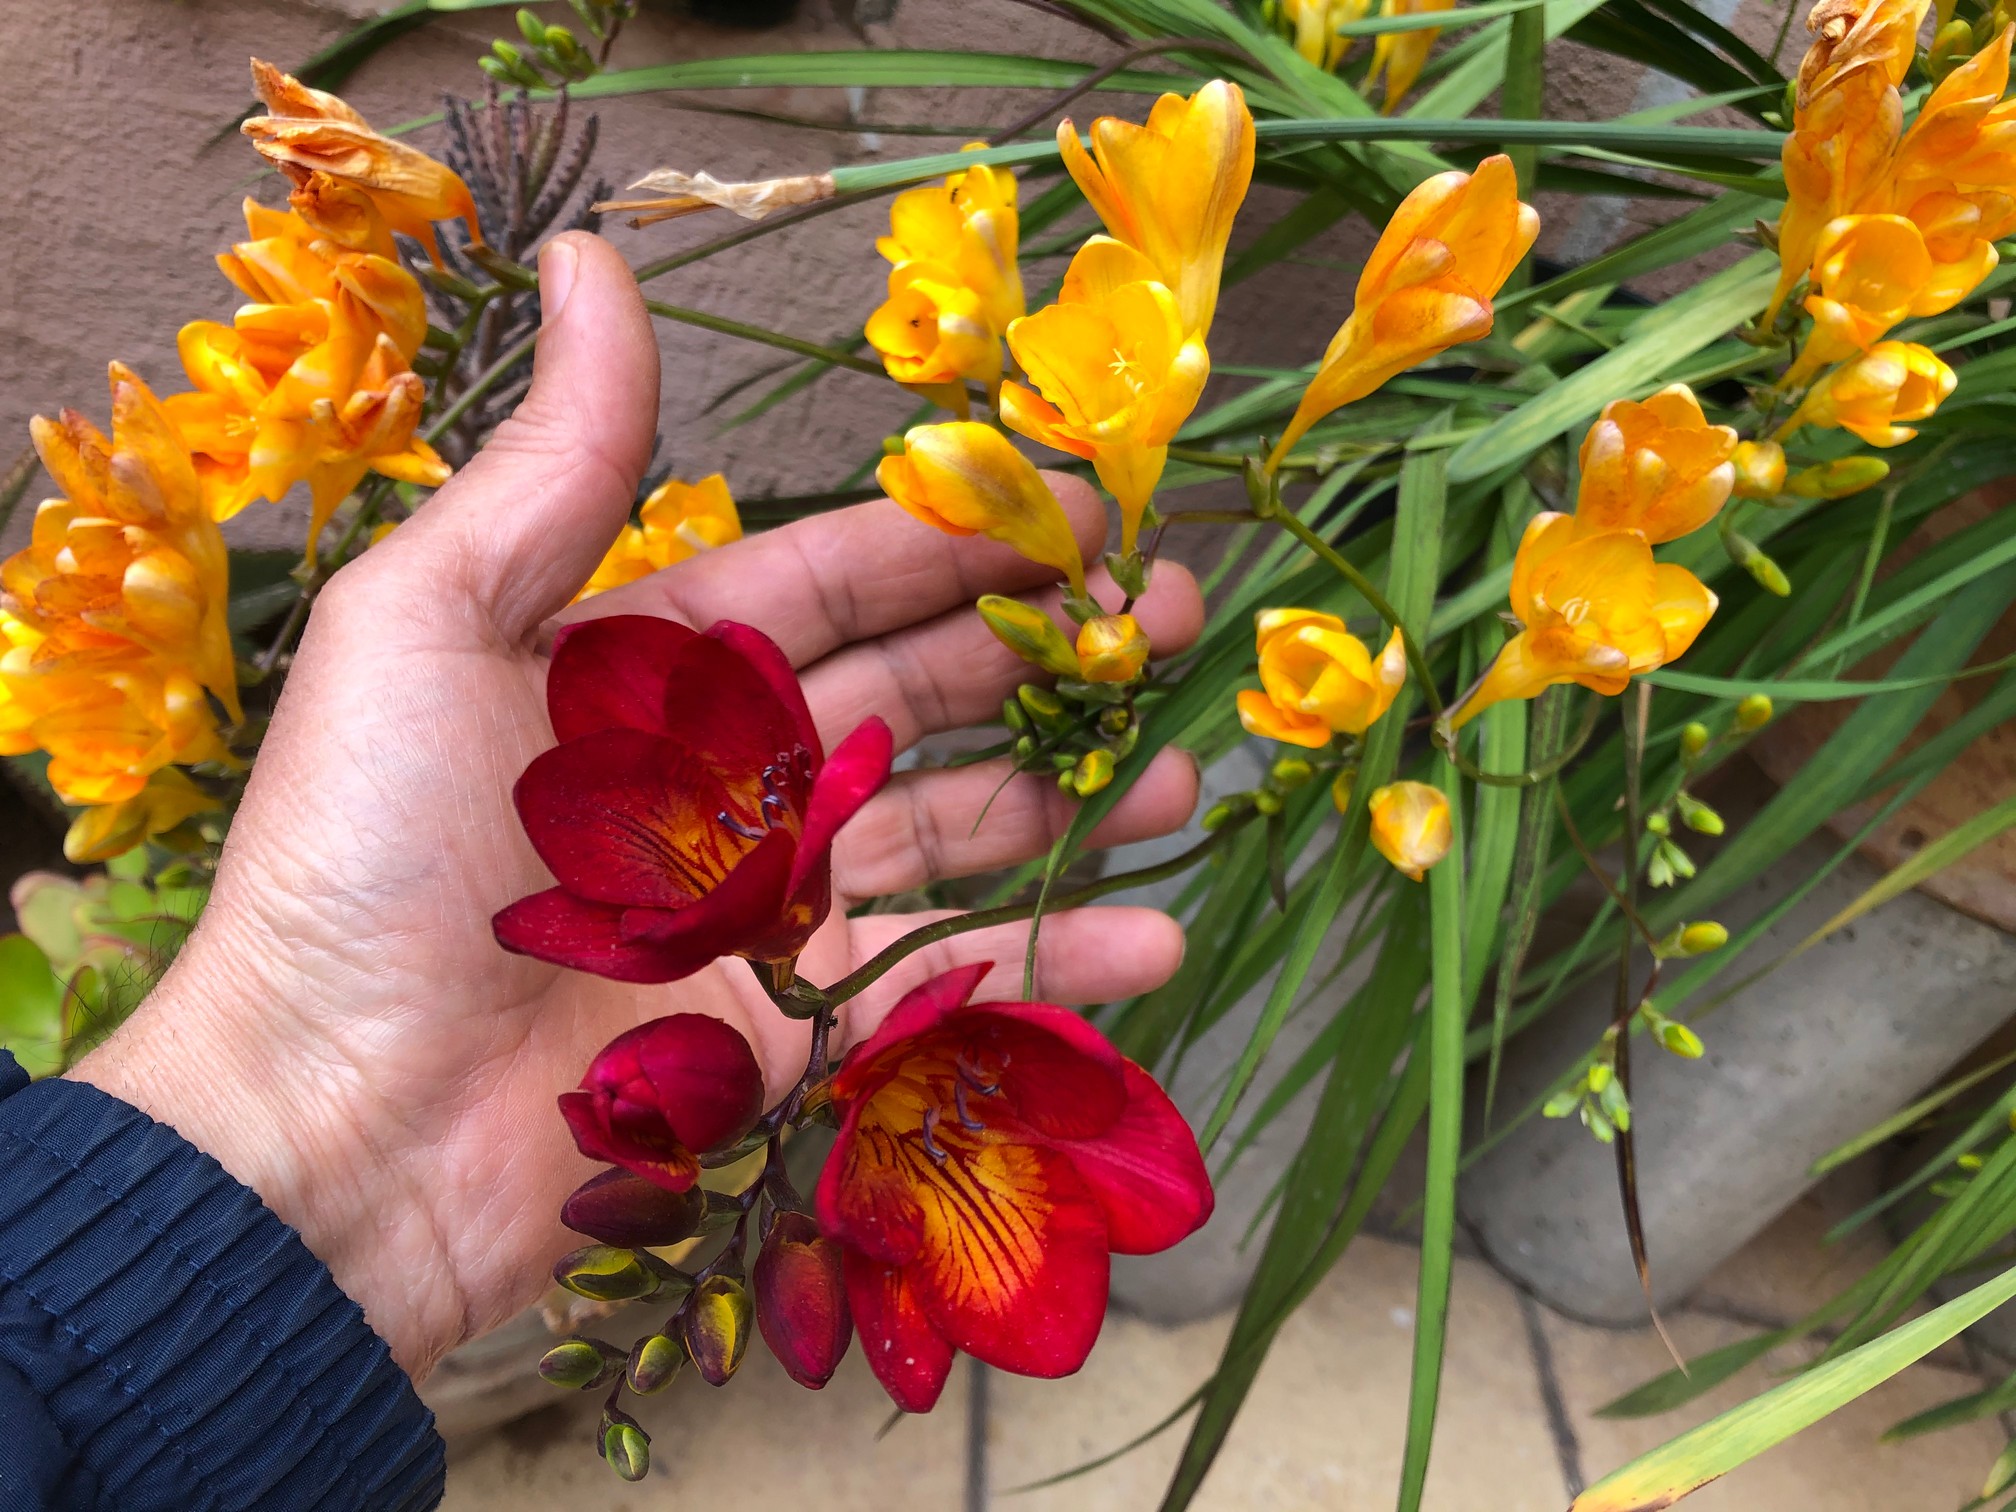 Freesia is an attractive flower, with a strong, pleasantly sweet, citrus-like scent. These lovely and beautiful flowers are easy to grow.